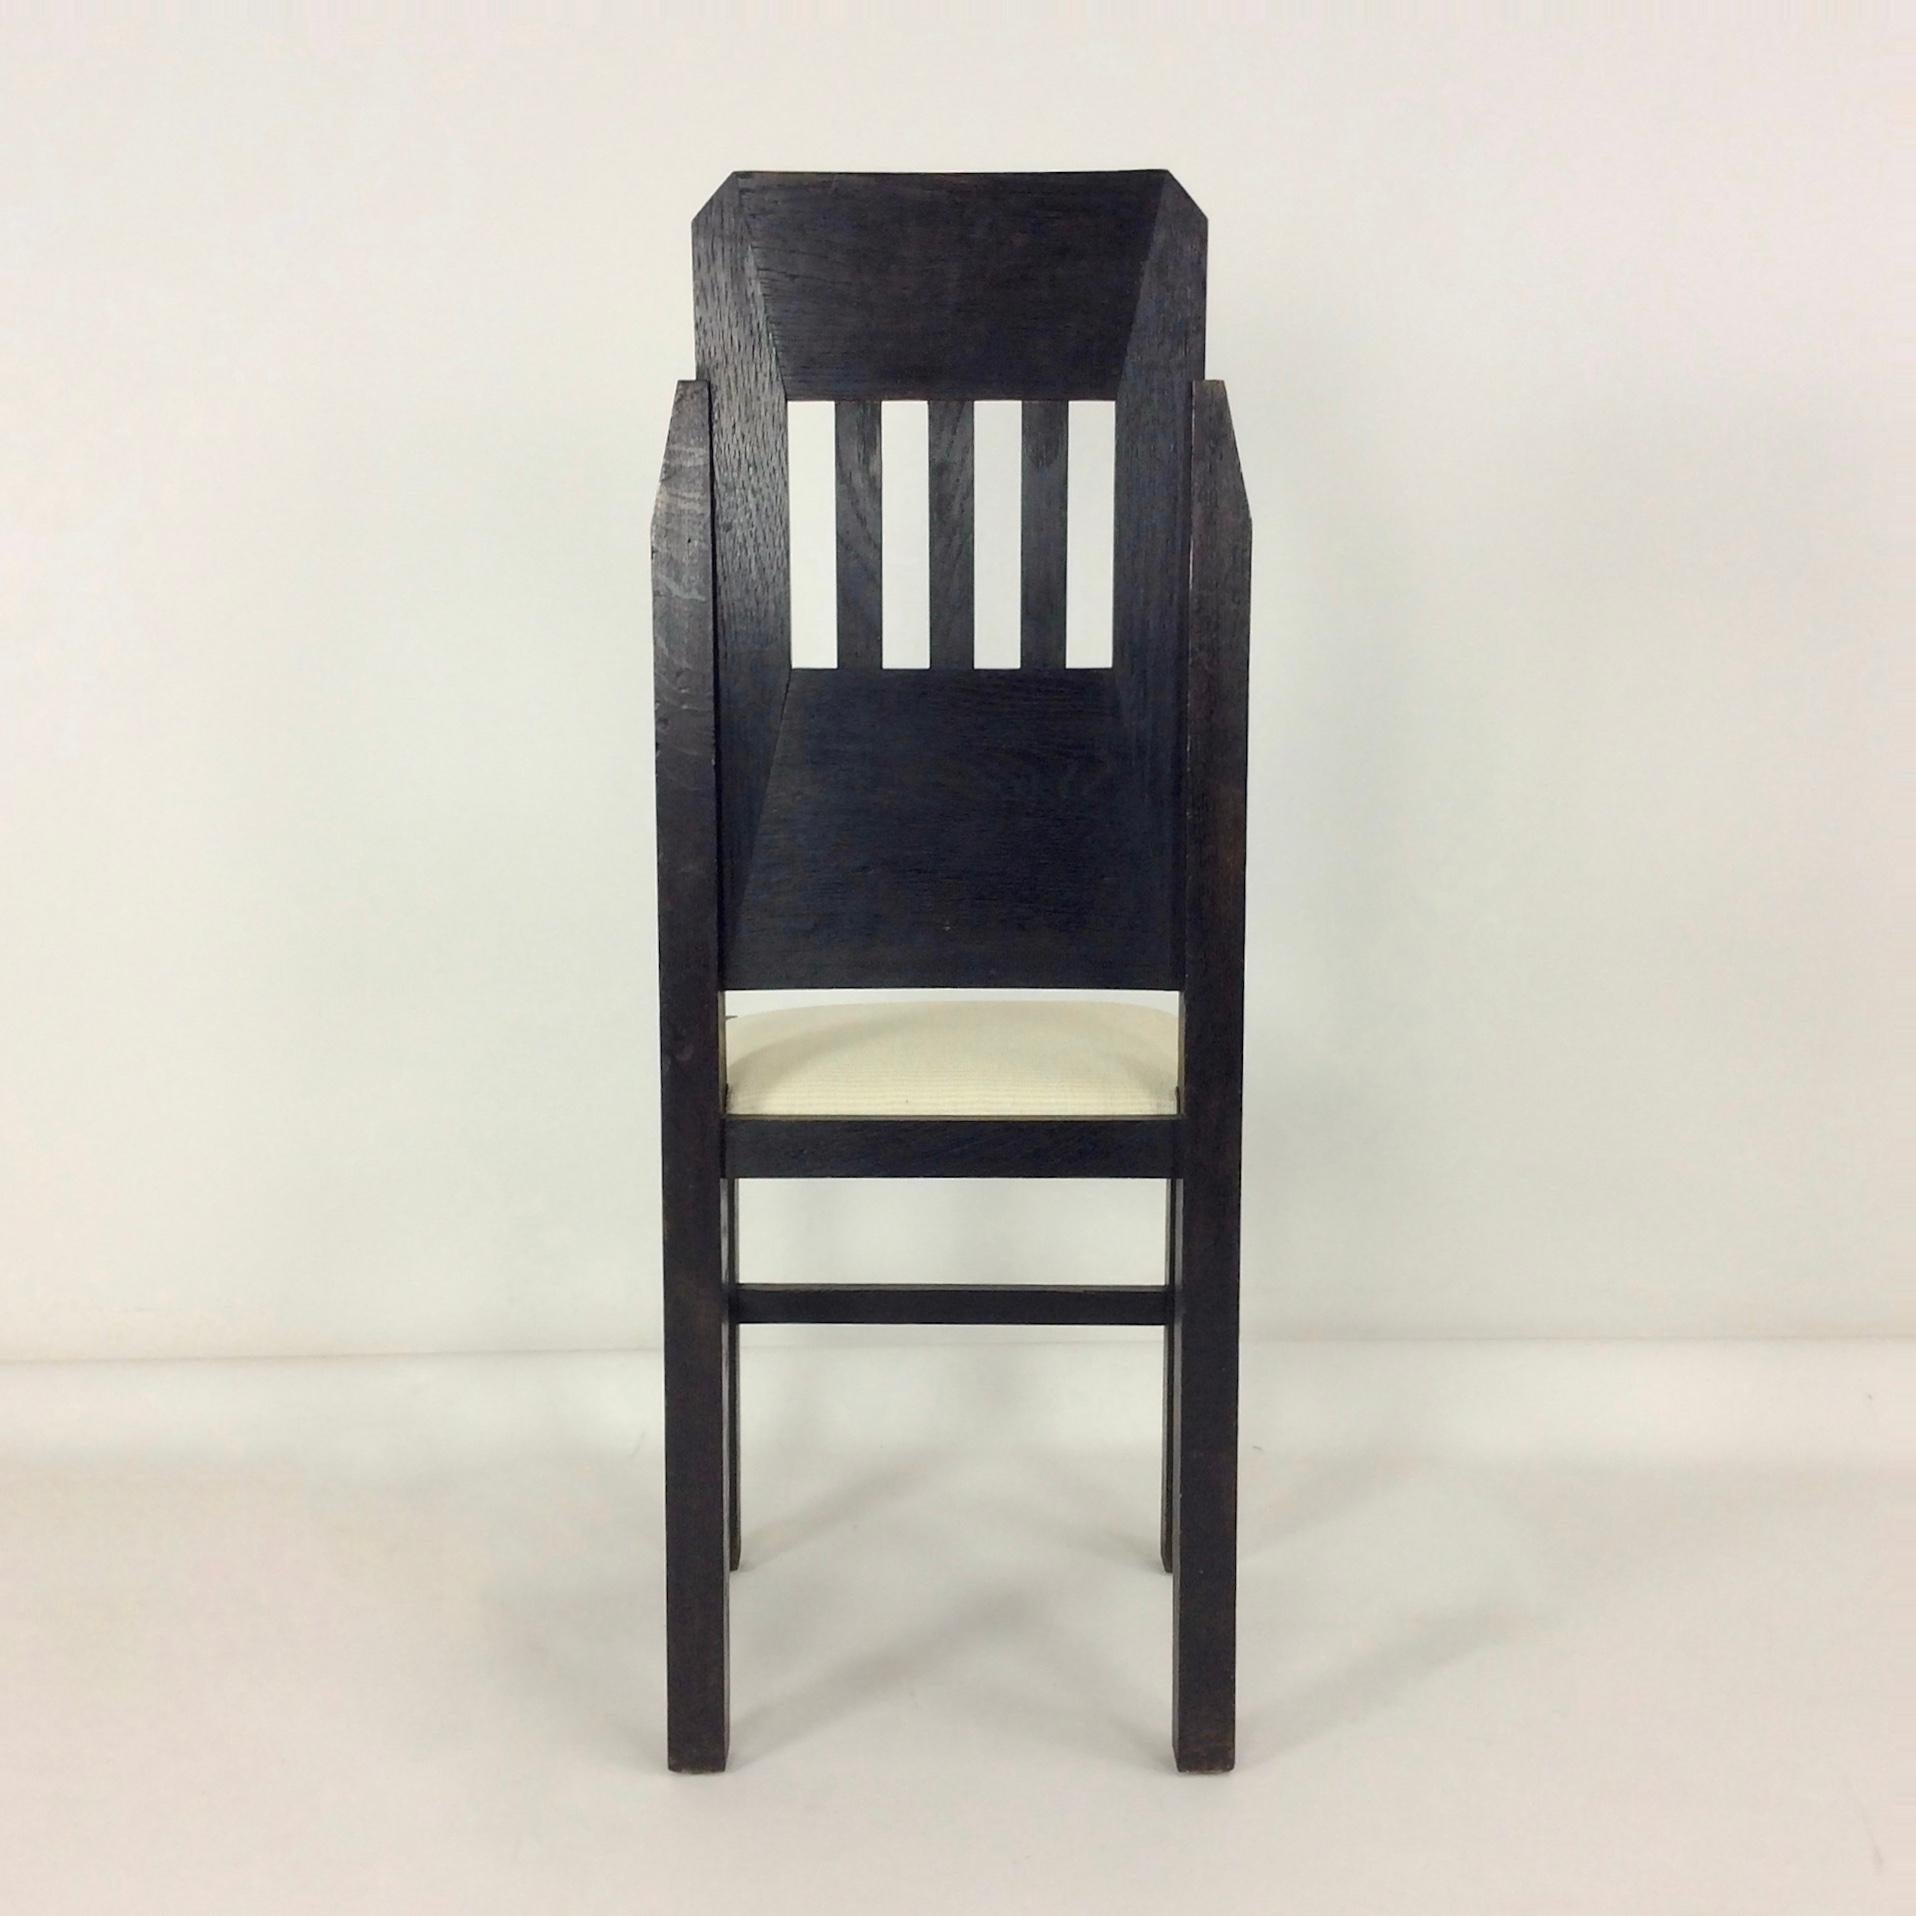 Marcel-Louis Baugniet Modernist Chair, circa 1925, Belgium In Good Condition For Sale In Brussels, BE